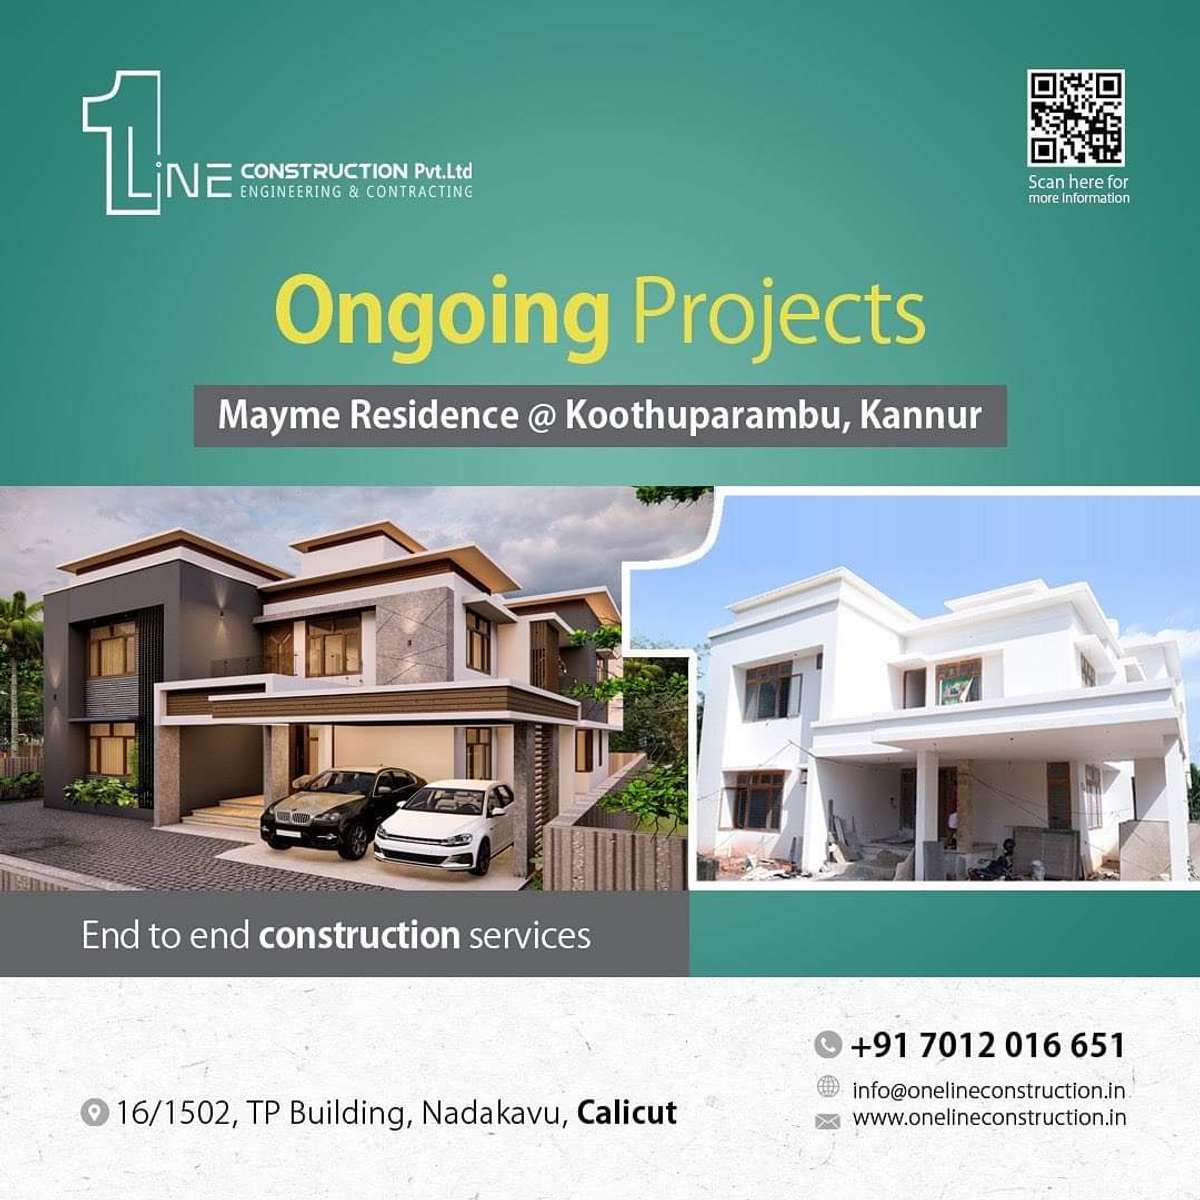 Designs by Contractor One Line Construction Pvt Ltd, Kozhikode | Kolo